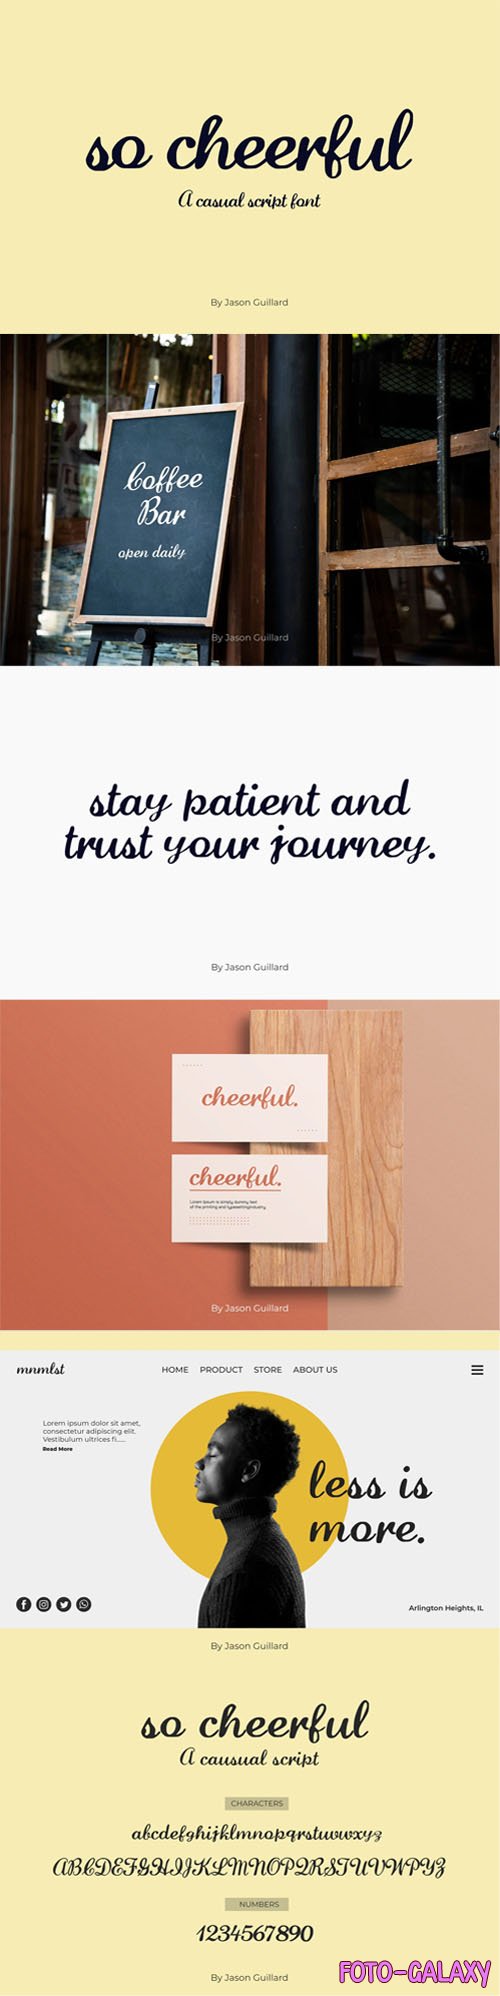 So Cheerful - Casual Script Typeface